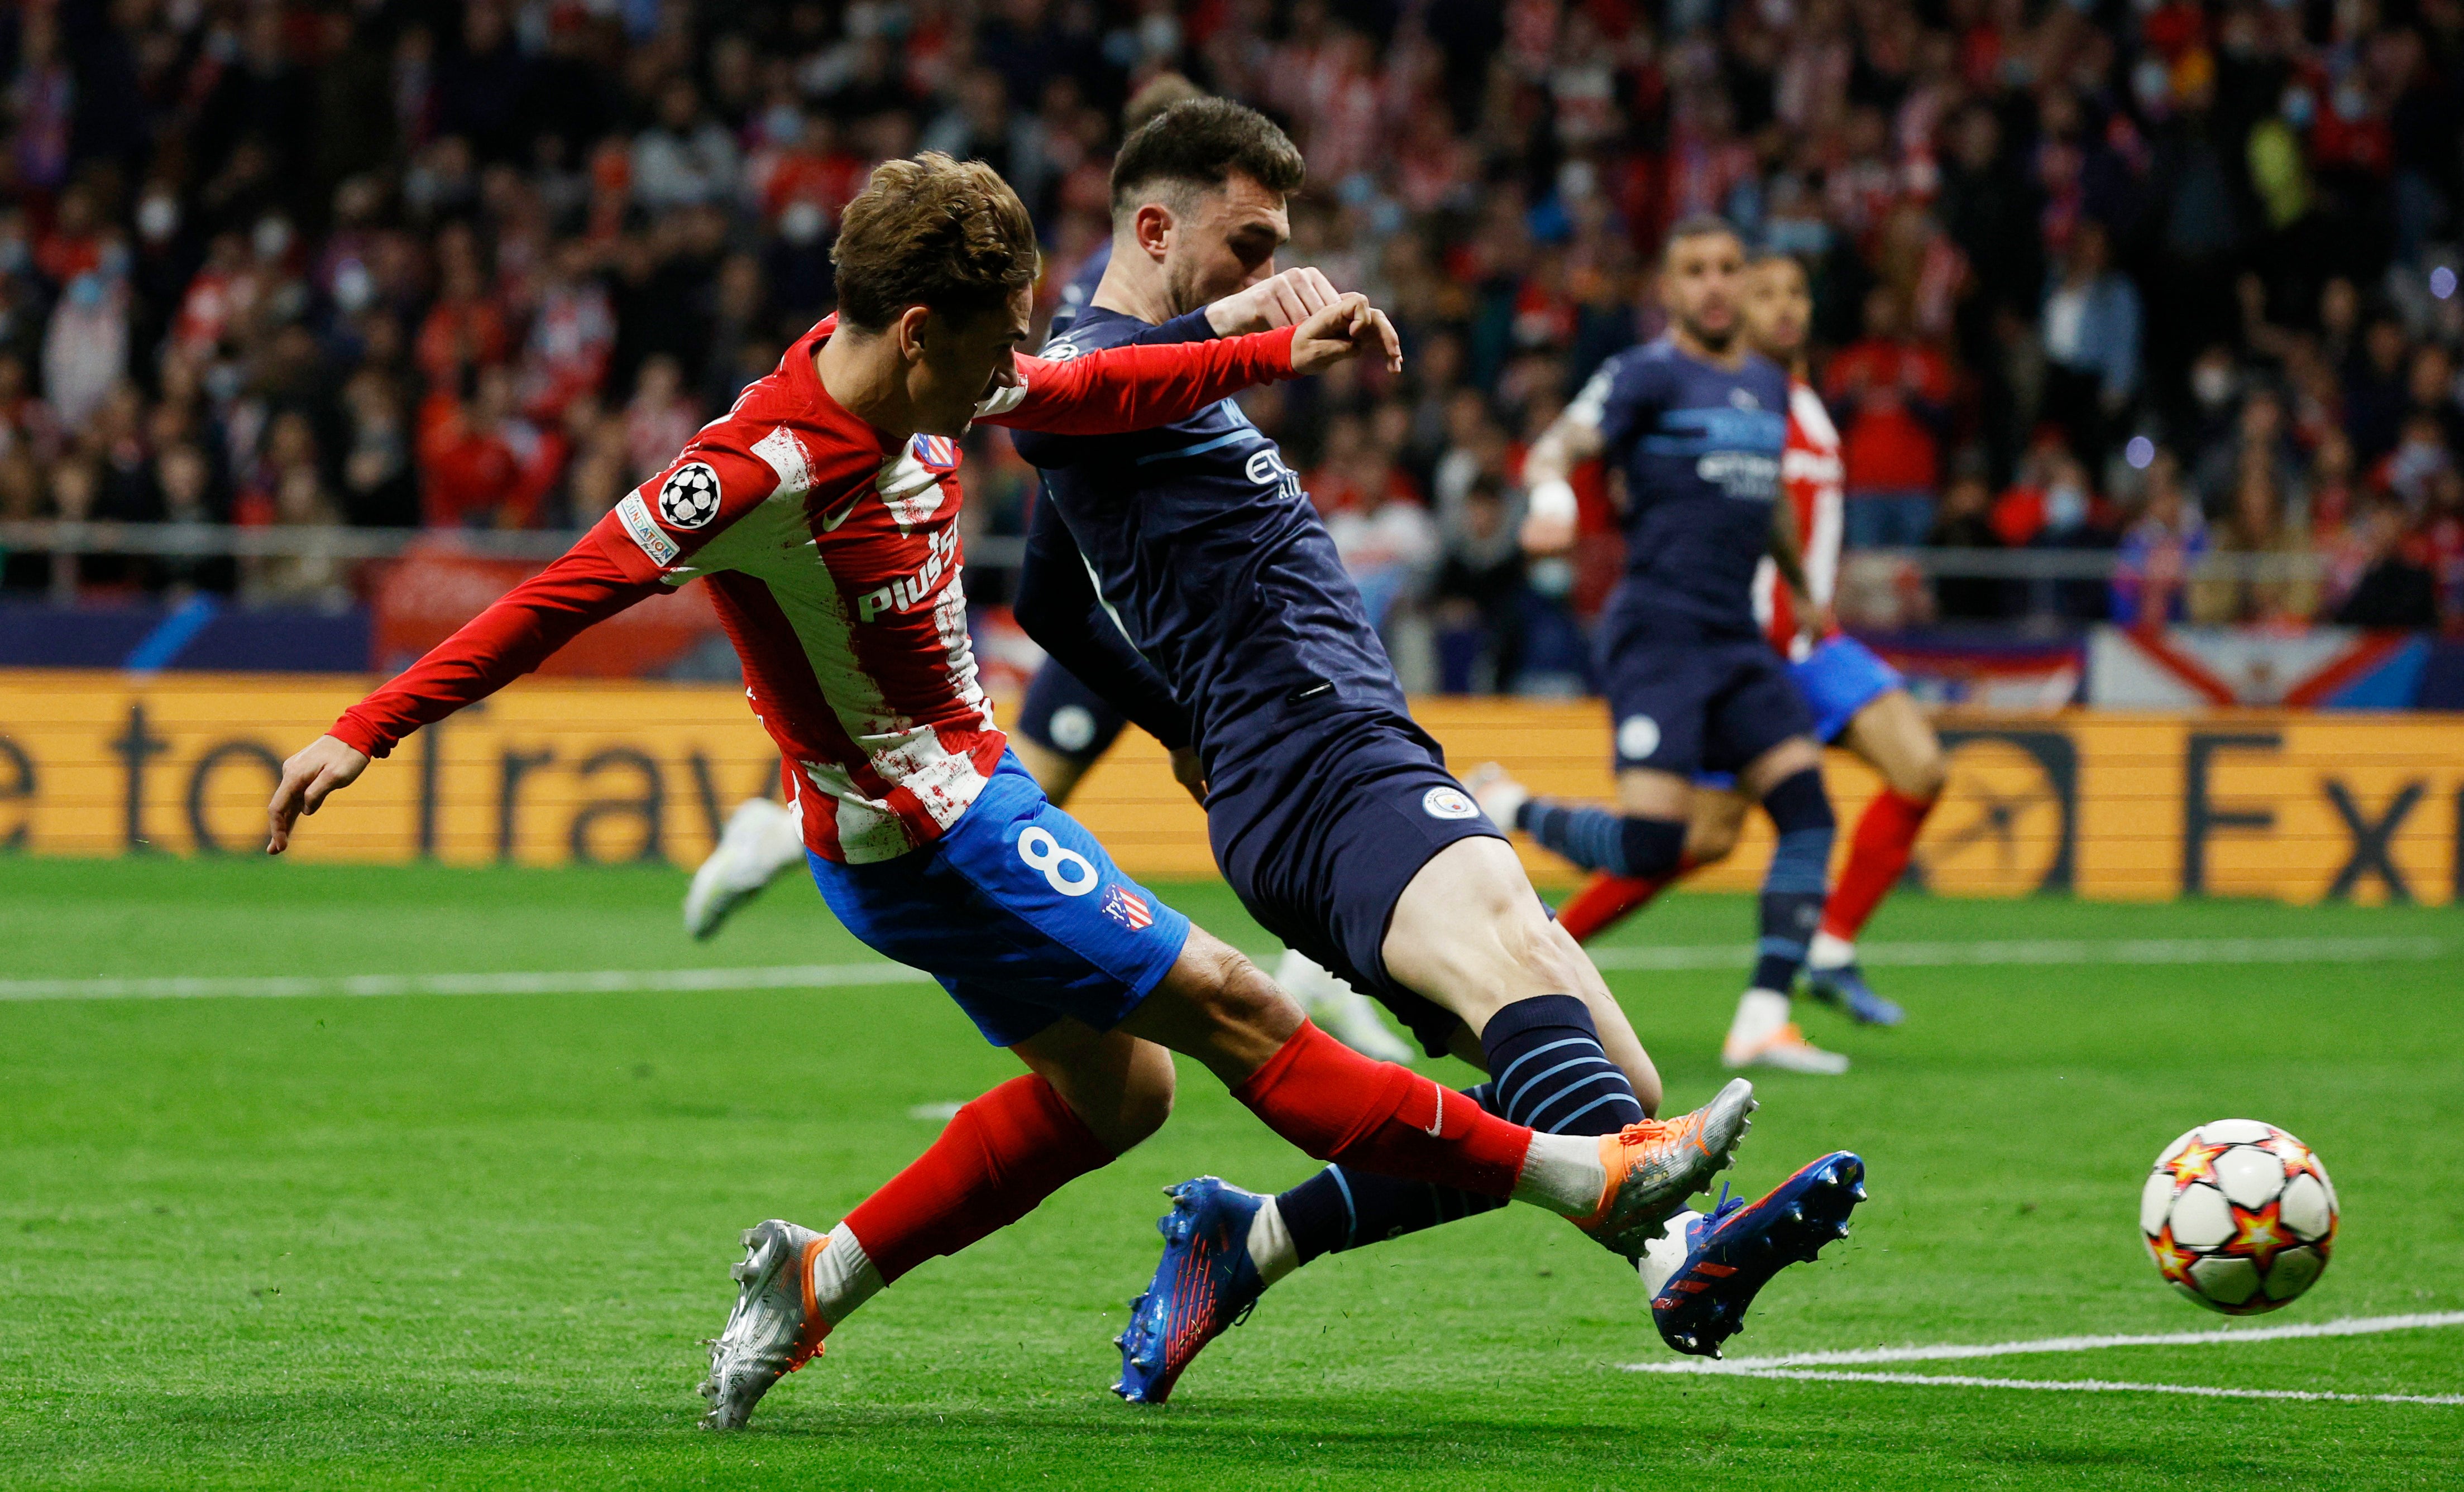 Atletico Madrid vs Man City LIVE: Champions League result, final score and reaction - City go through - The Independent